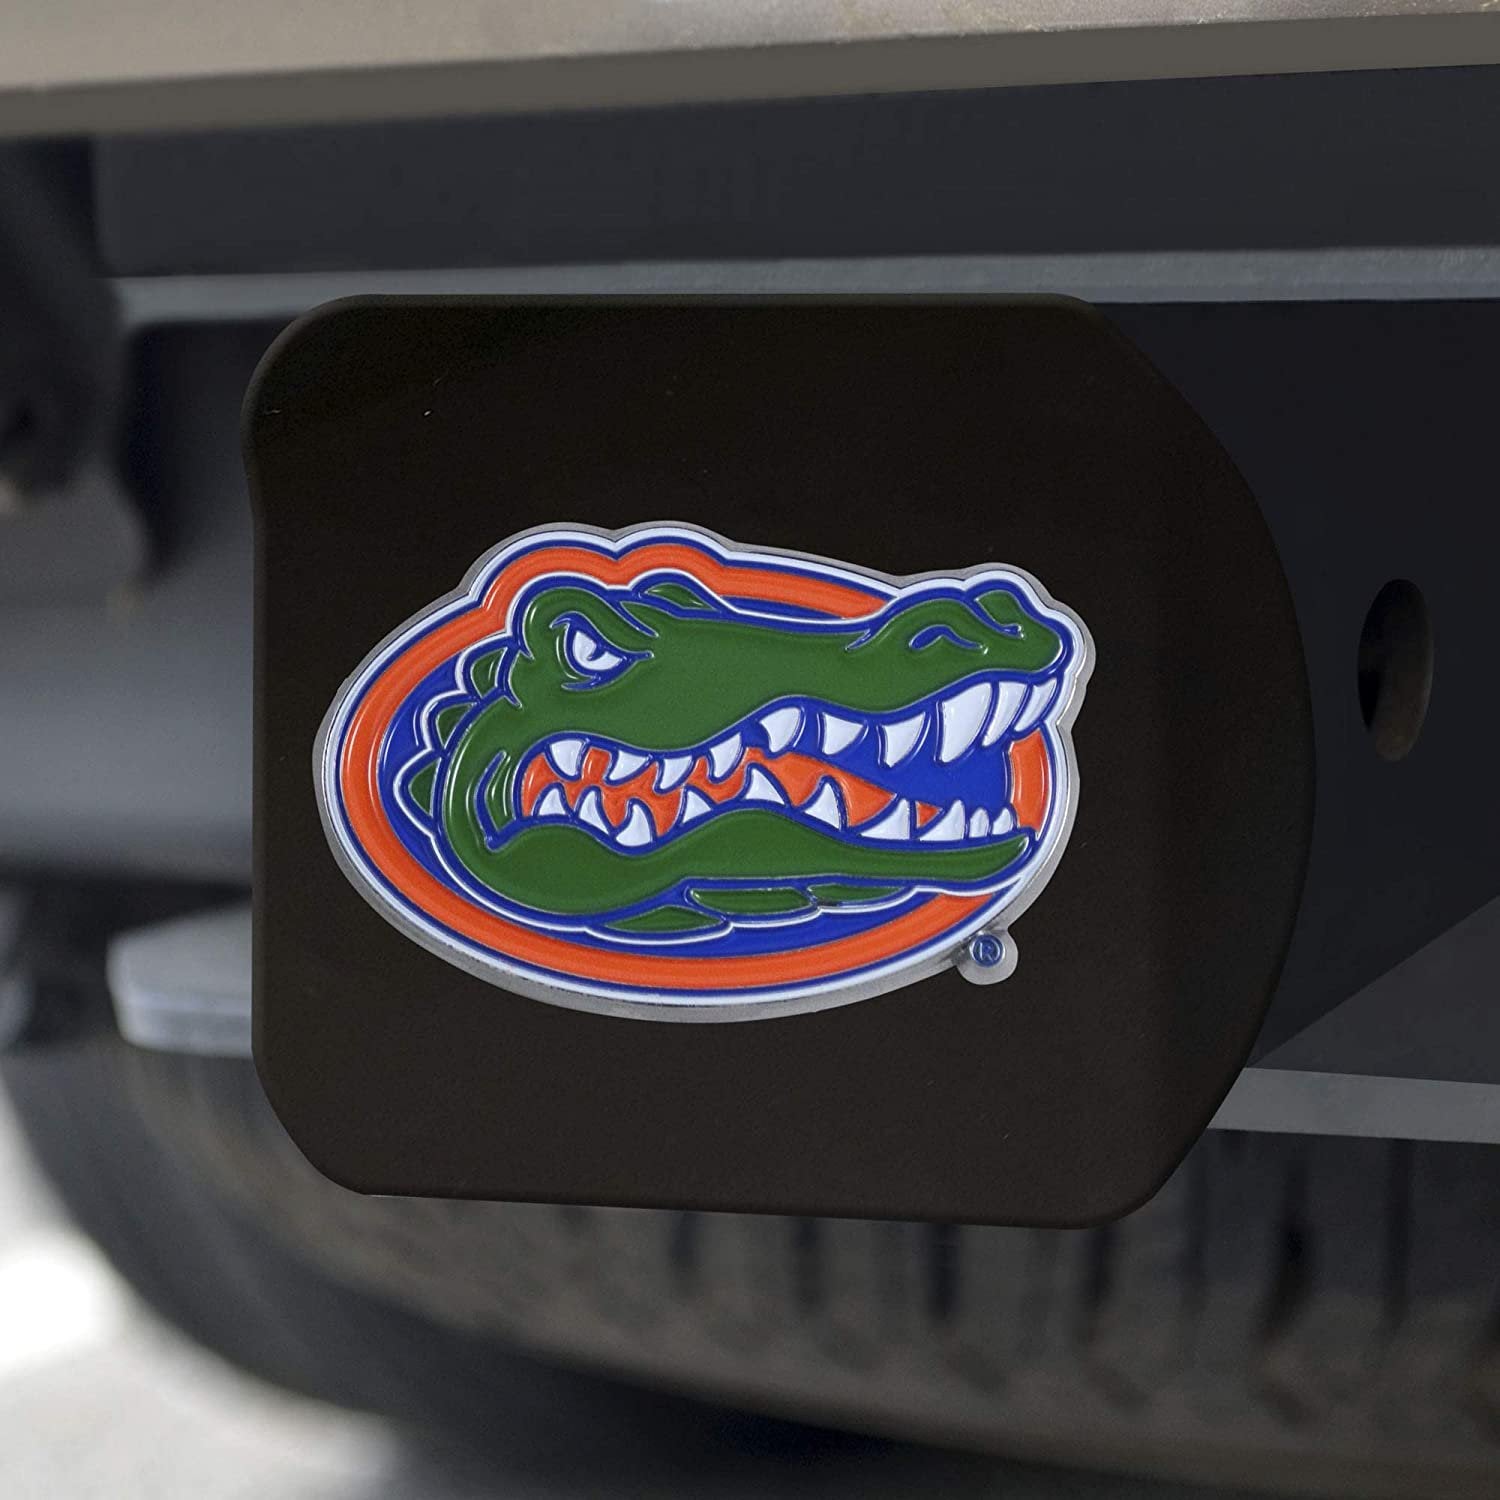 Florida Gators Solid Metal Black Hitch Cover with Color Metal Emblem 2 Inch Square Type III University of